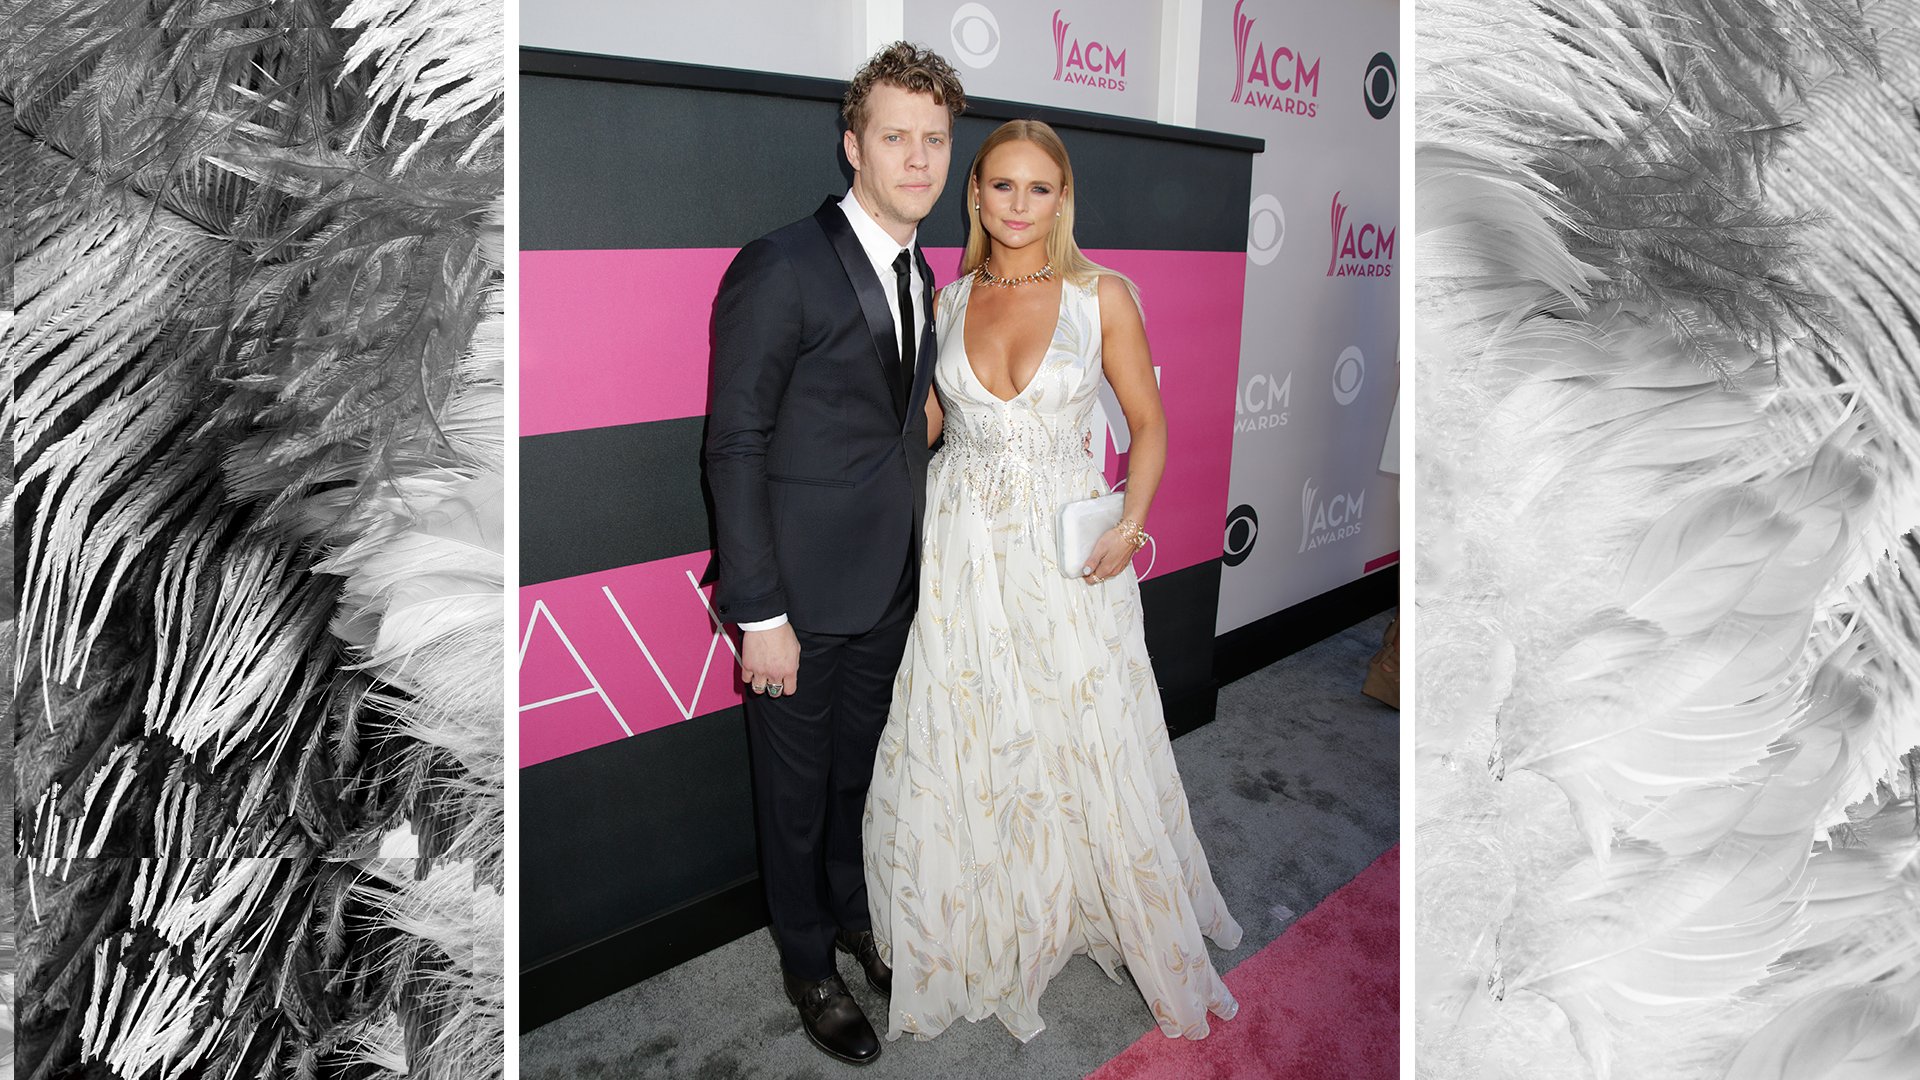 Miranda Lambert, flanked by her beau, Anderson East, glides down the red carpet in an angelic white dress with a sparkly choker.